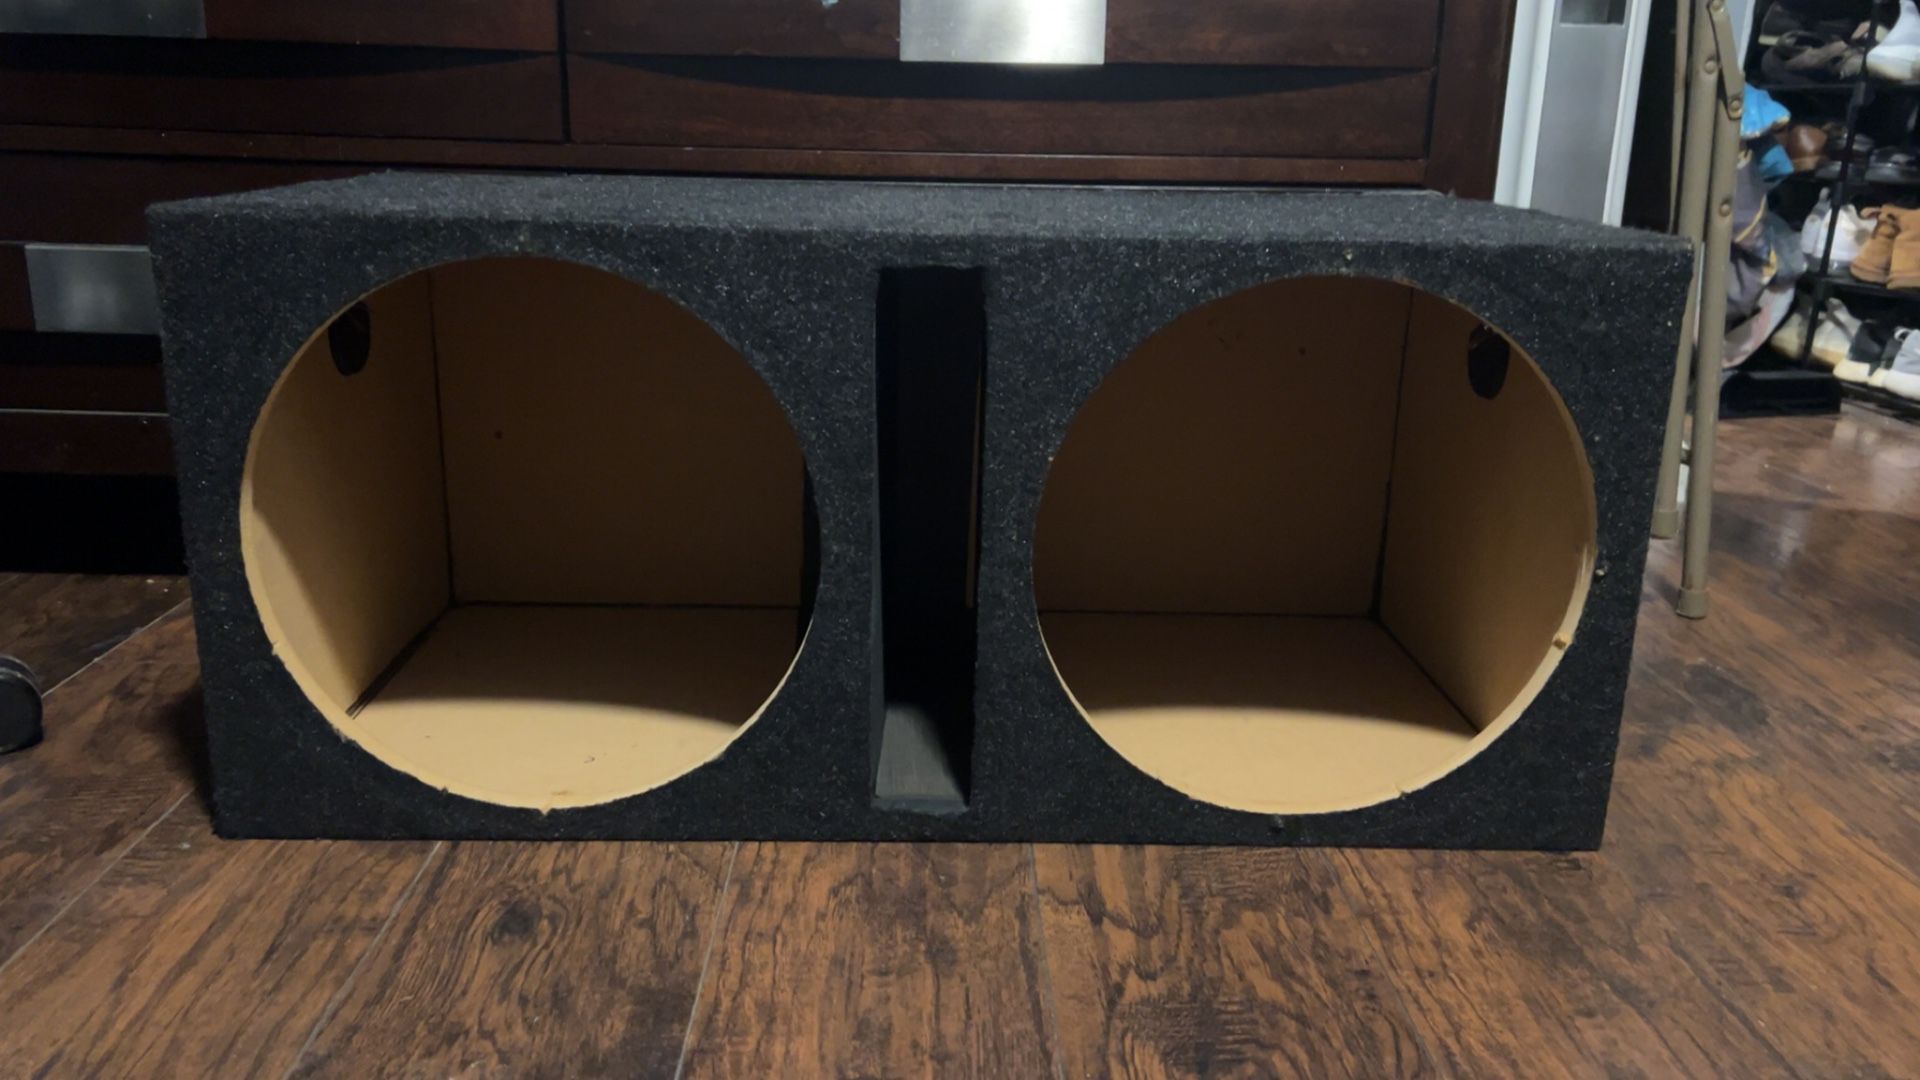 2 15s Ported Subwoofer Box 